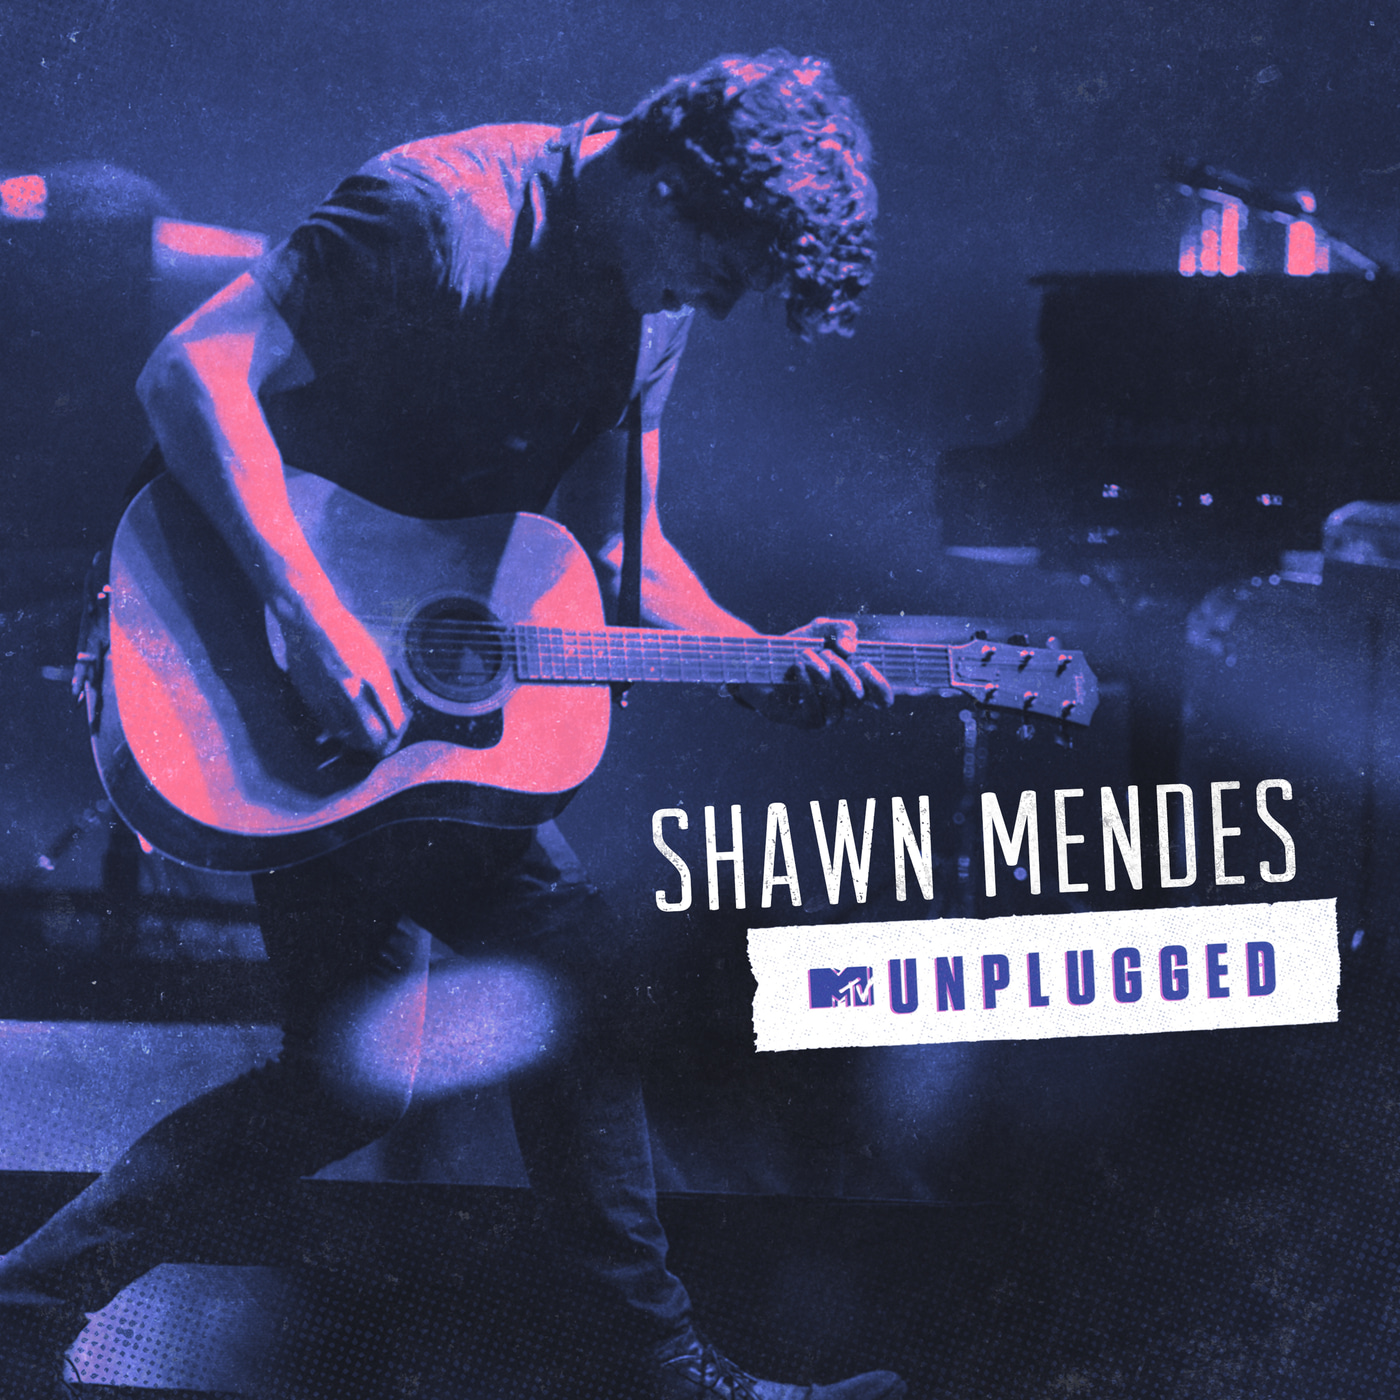 Shawn Mendes-Use Somebody/Treat You Better (MTV Unplugged)